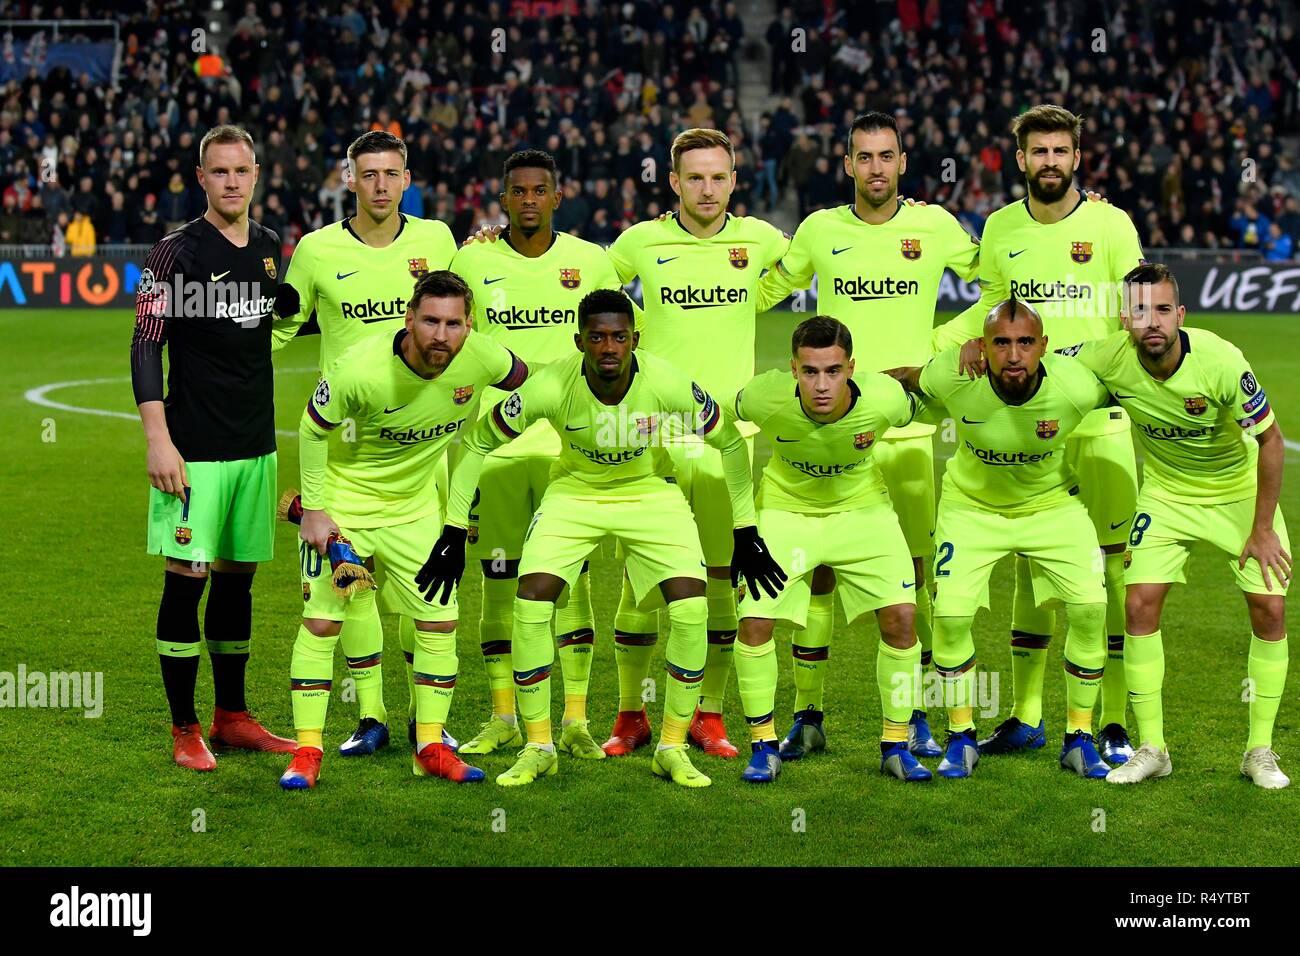 Soccer : UEFA Champions League 2018/19 Group B : PSV Eindhoven 1-2 FC  Barcelona in Eindhoven, Holland in November 28, 2018. FC Barcelona team  foto Credit: Sander Chamid/AFLO/Alamy Live News Stock Photo - Alamy